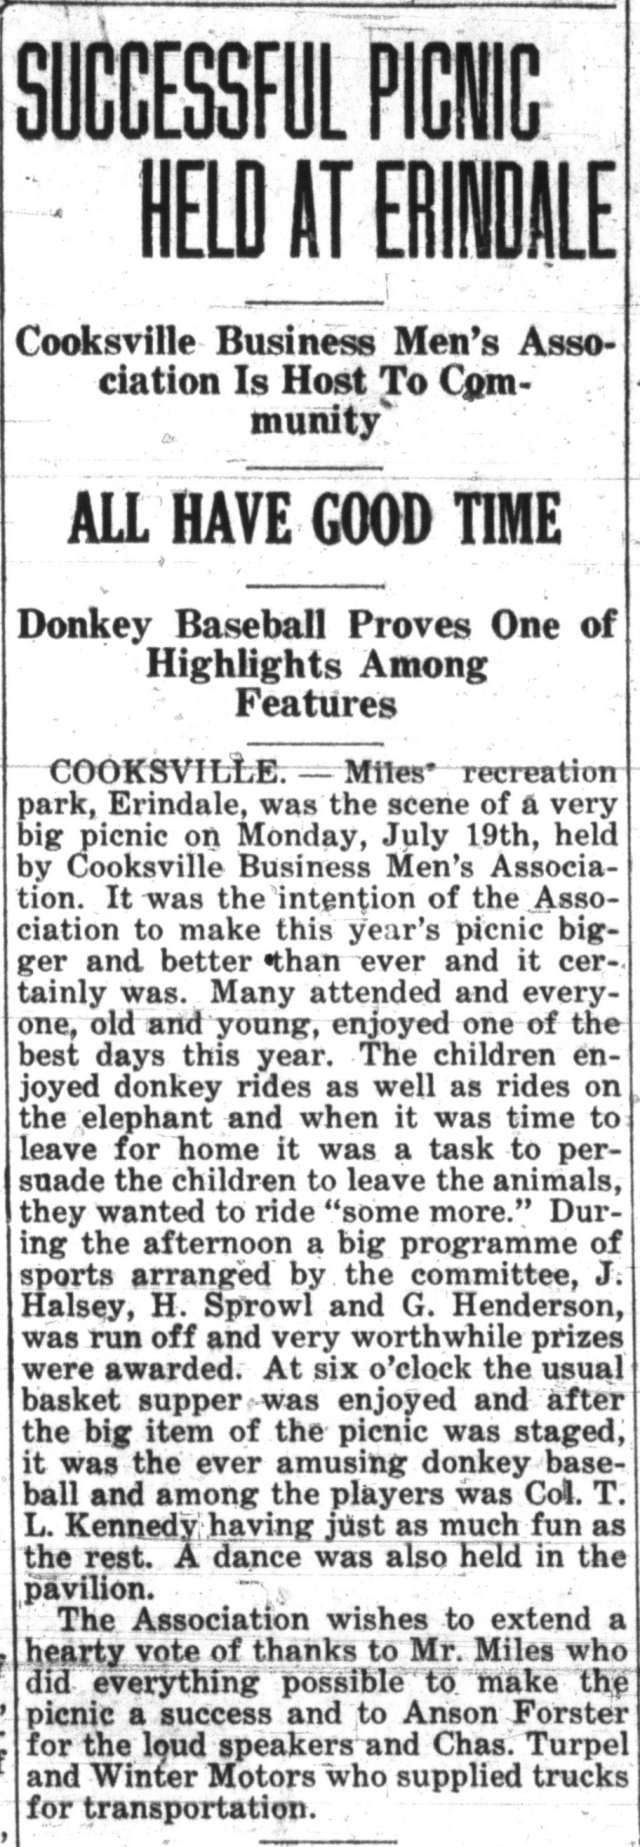 A scanned version of a 2-paragraph newspaper article: "Successful Picnic Held at Erindale. Cooksville Business Men's Association is Host to Community. All Have Good Time. Donkey Baseball Proves One of the Highlights Among Features."